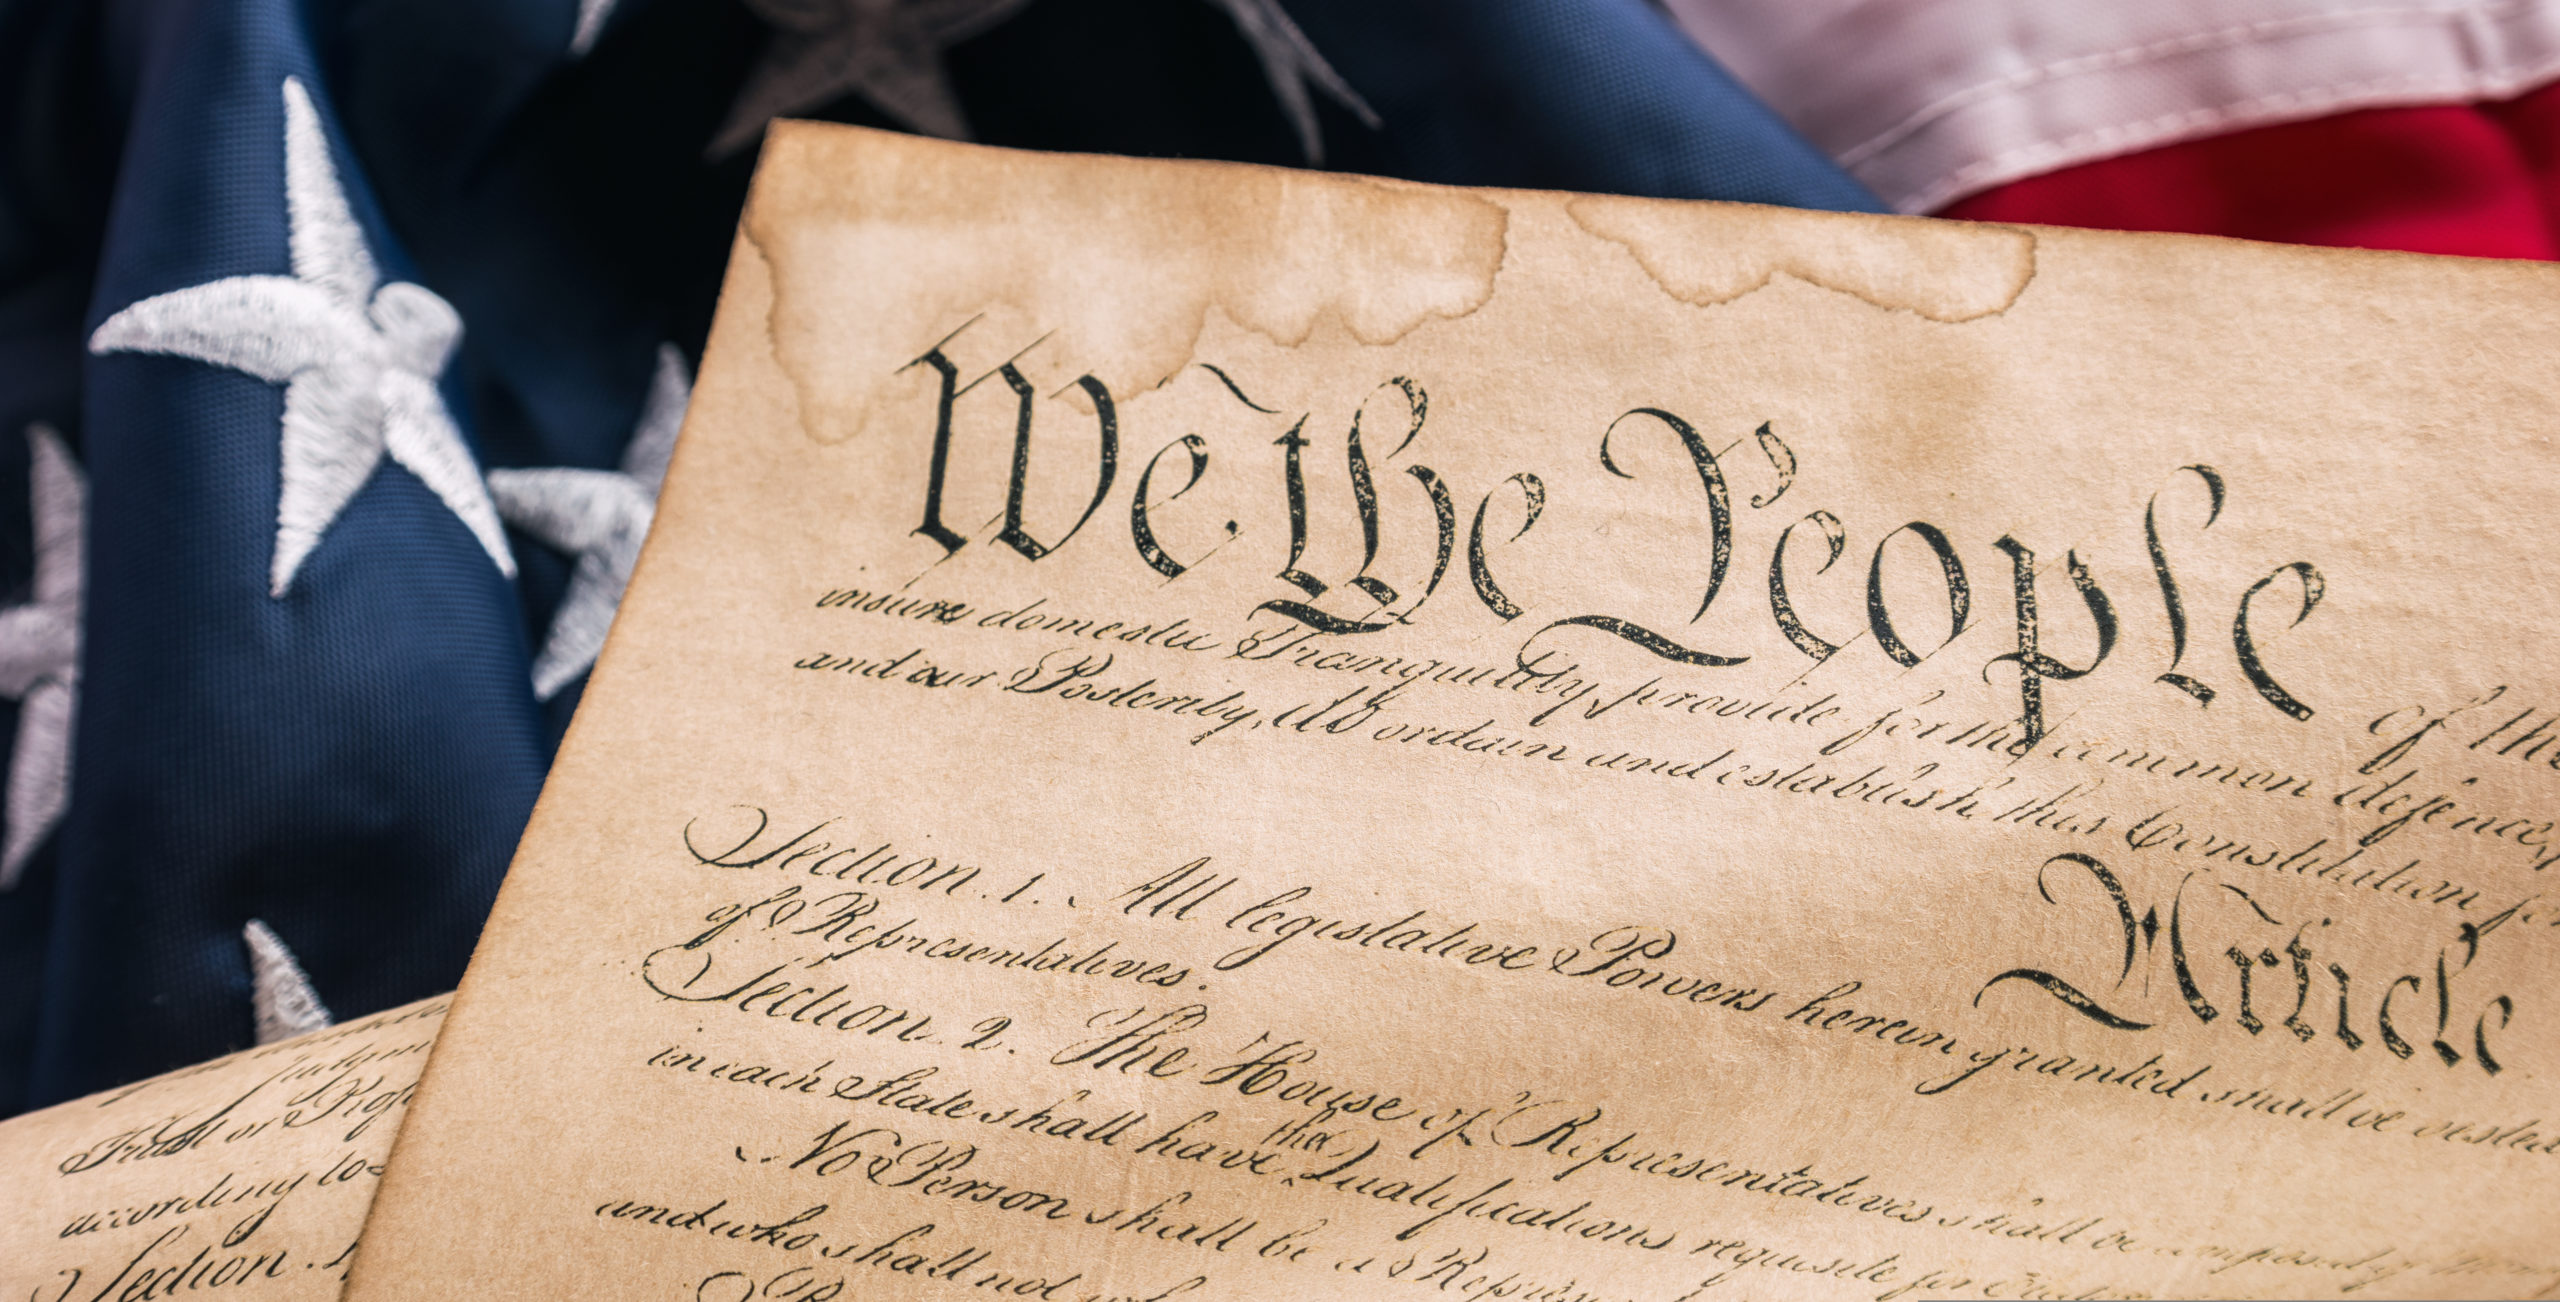 Introba Team Secures Rare Copy of the Declaration of Independence